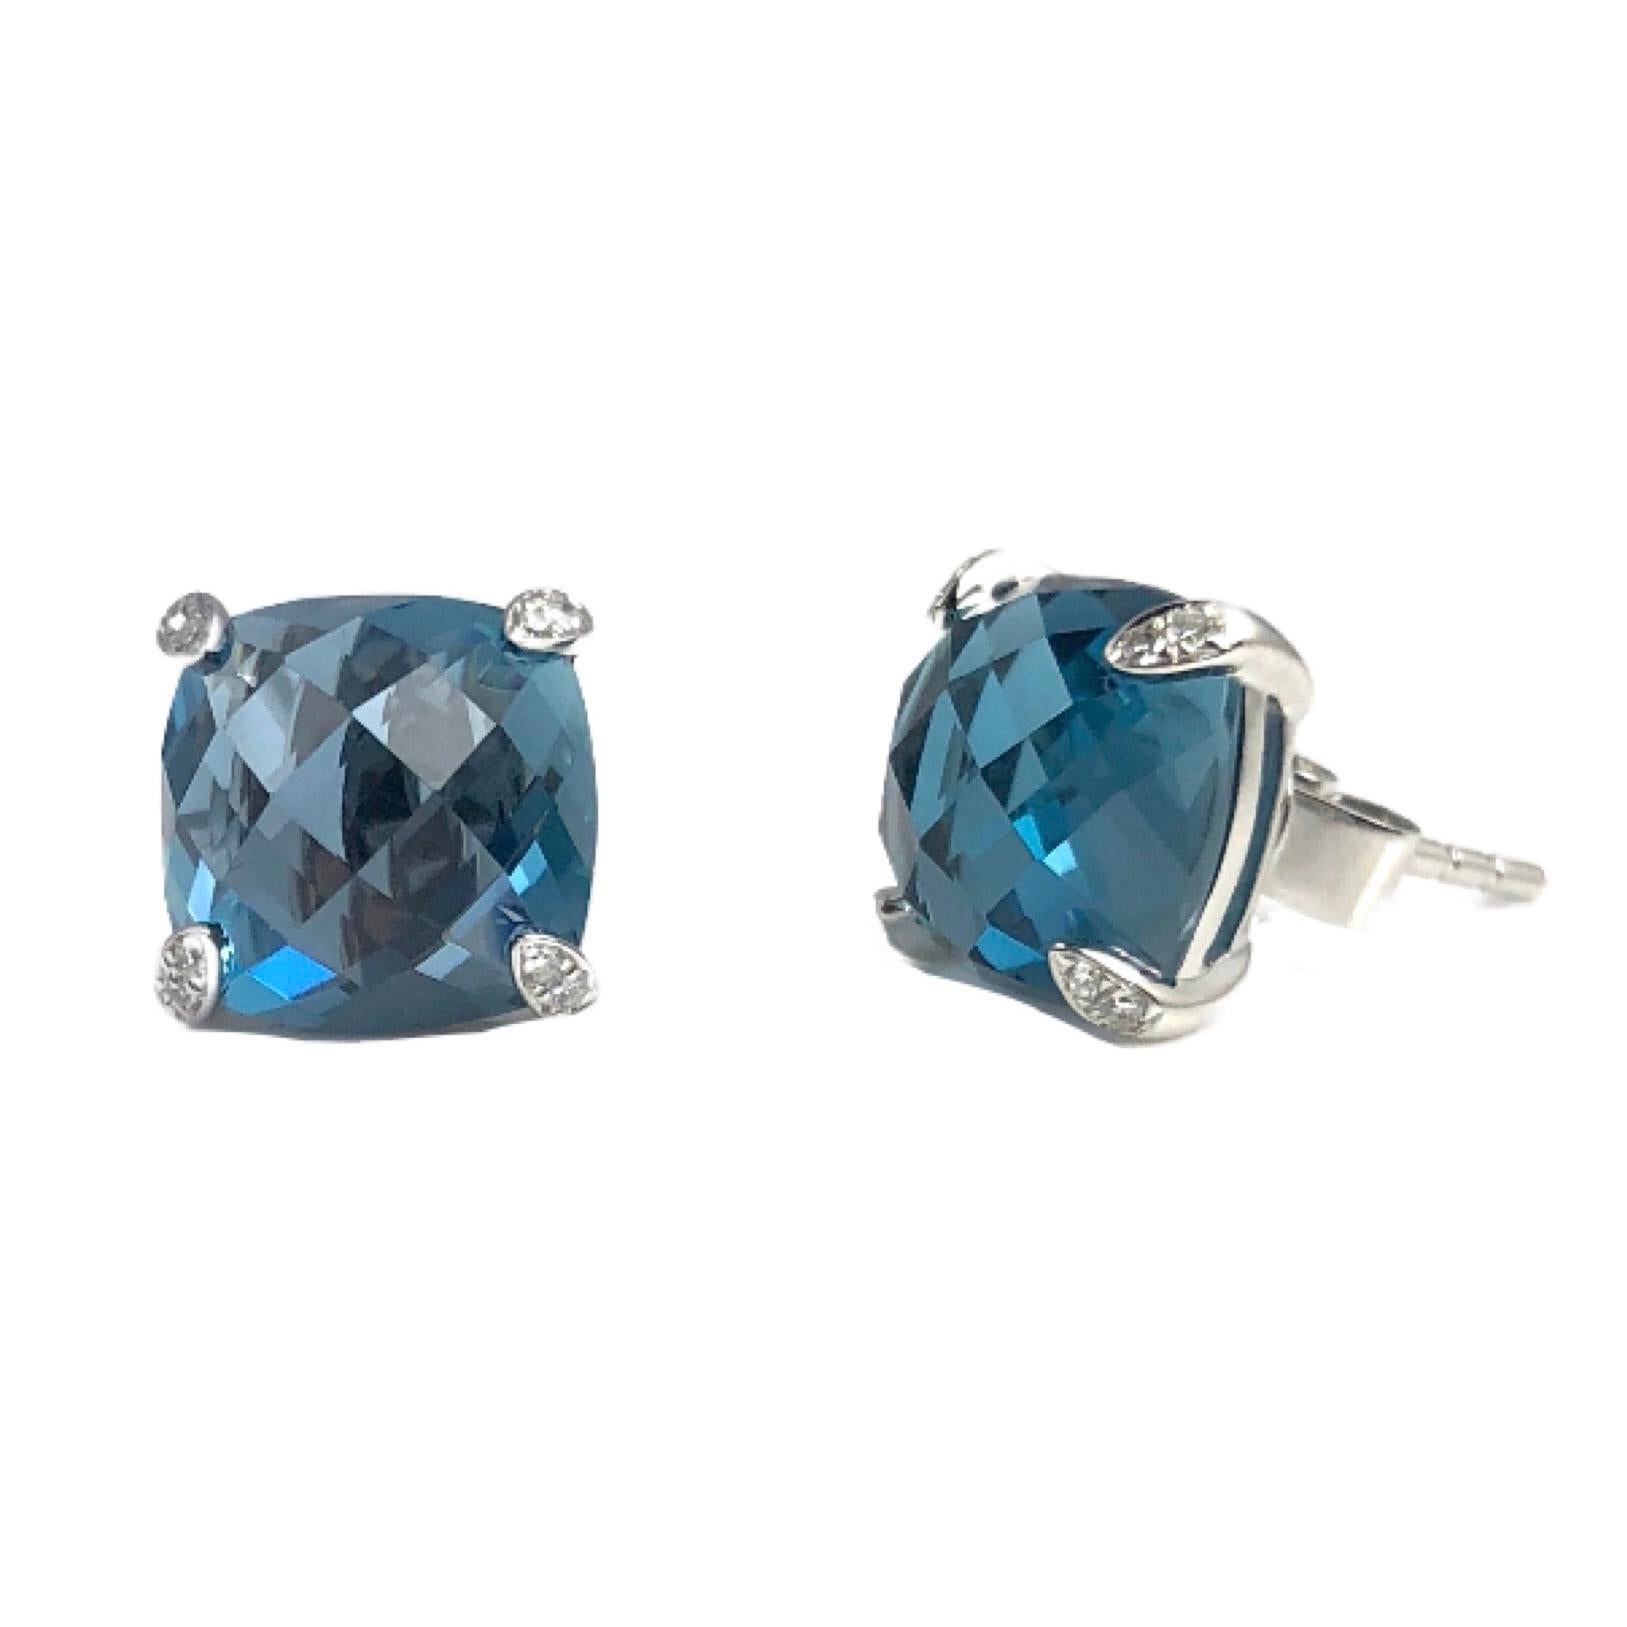 These beautiful earrings feature 7.92 carats cushion cut blue topaz. The prongs are embellished with 0.05 carats diamonds.

Set in 14k white gold, these earrings would be a welcome addition to any jewelry box.

Diamond Town is pleased to offer a